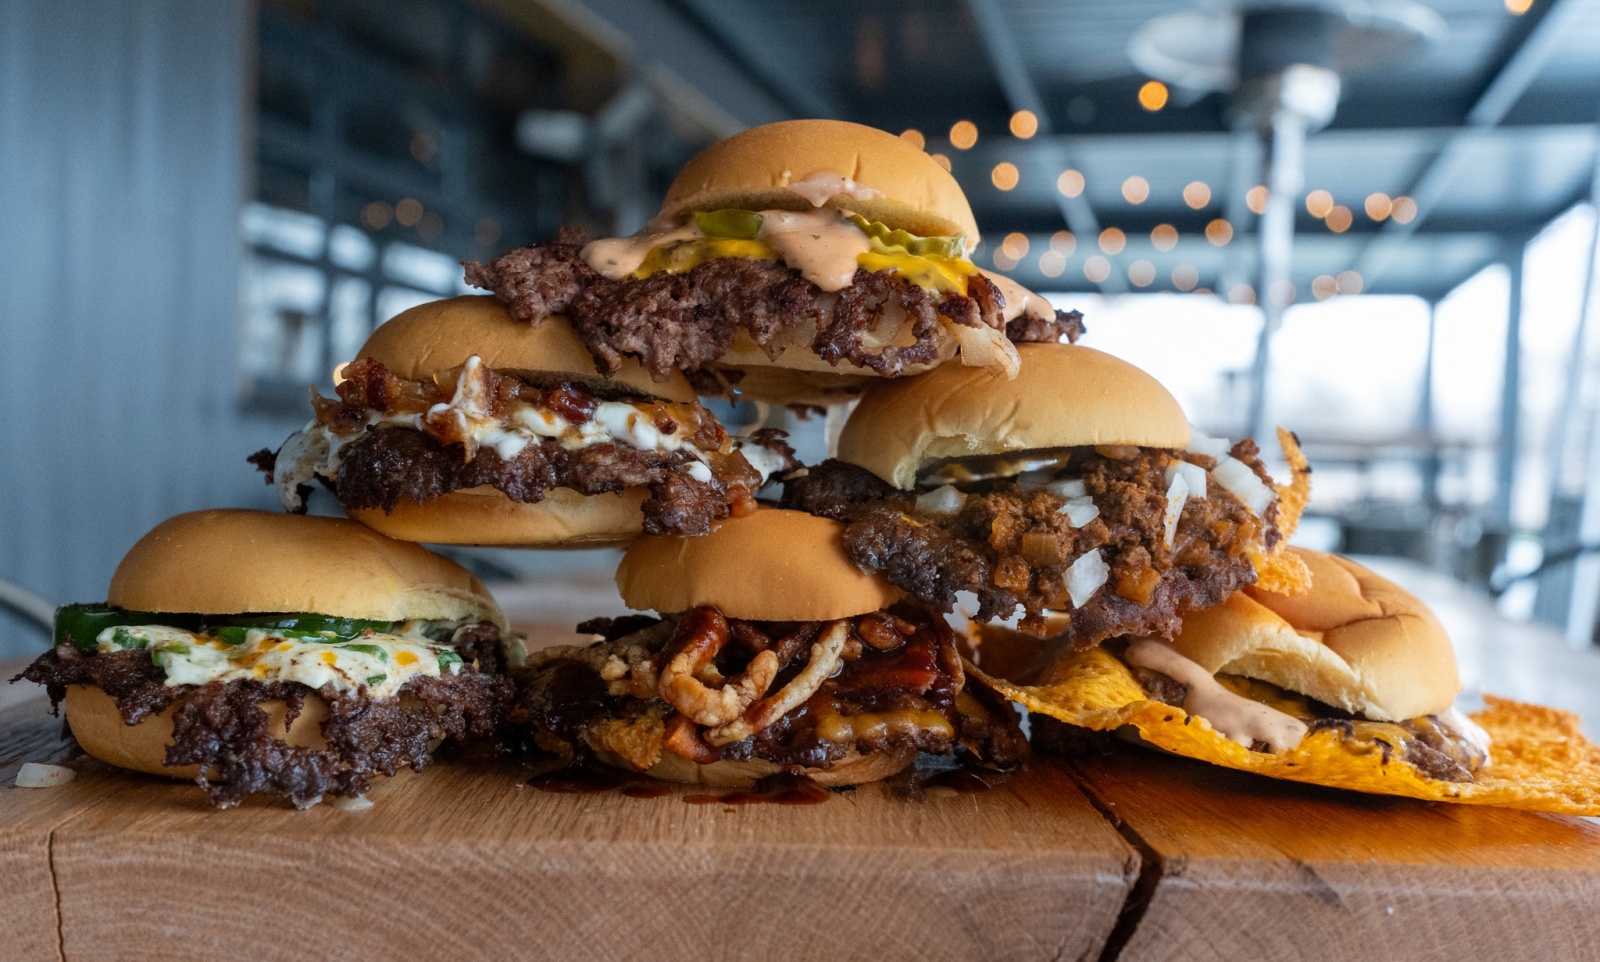 Six hamburgers from Mo Slider Company are stacked into a pyramid on a table